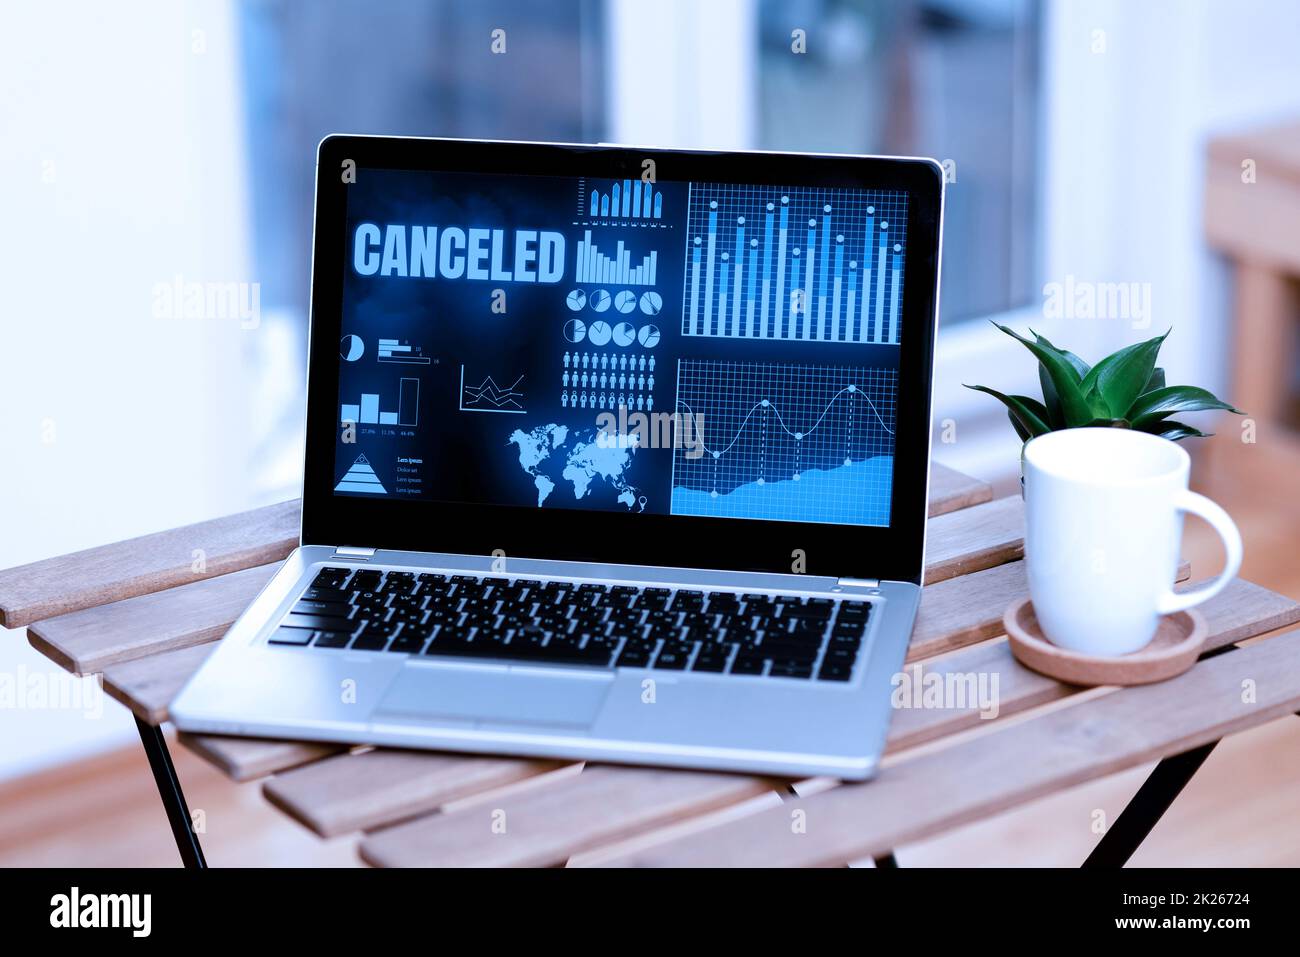 Hand writing sign Canceled. Word Written on to decide not to conduct or perform something planned or expected Laptop Resting On A Table Beside Coffee Mug And Plant Showing Work Process. Stock Photo